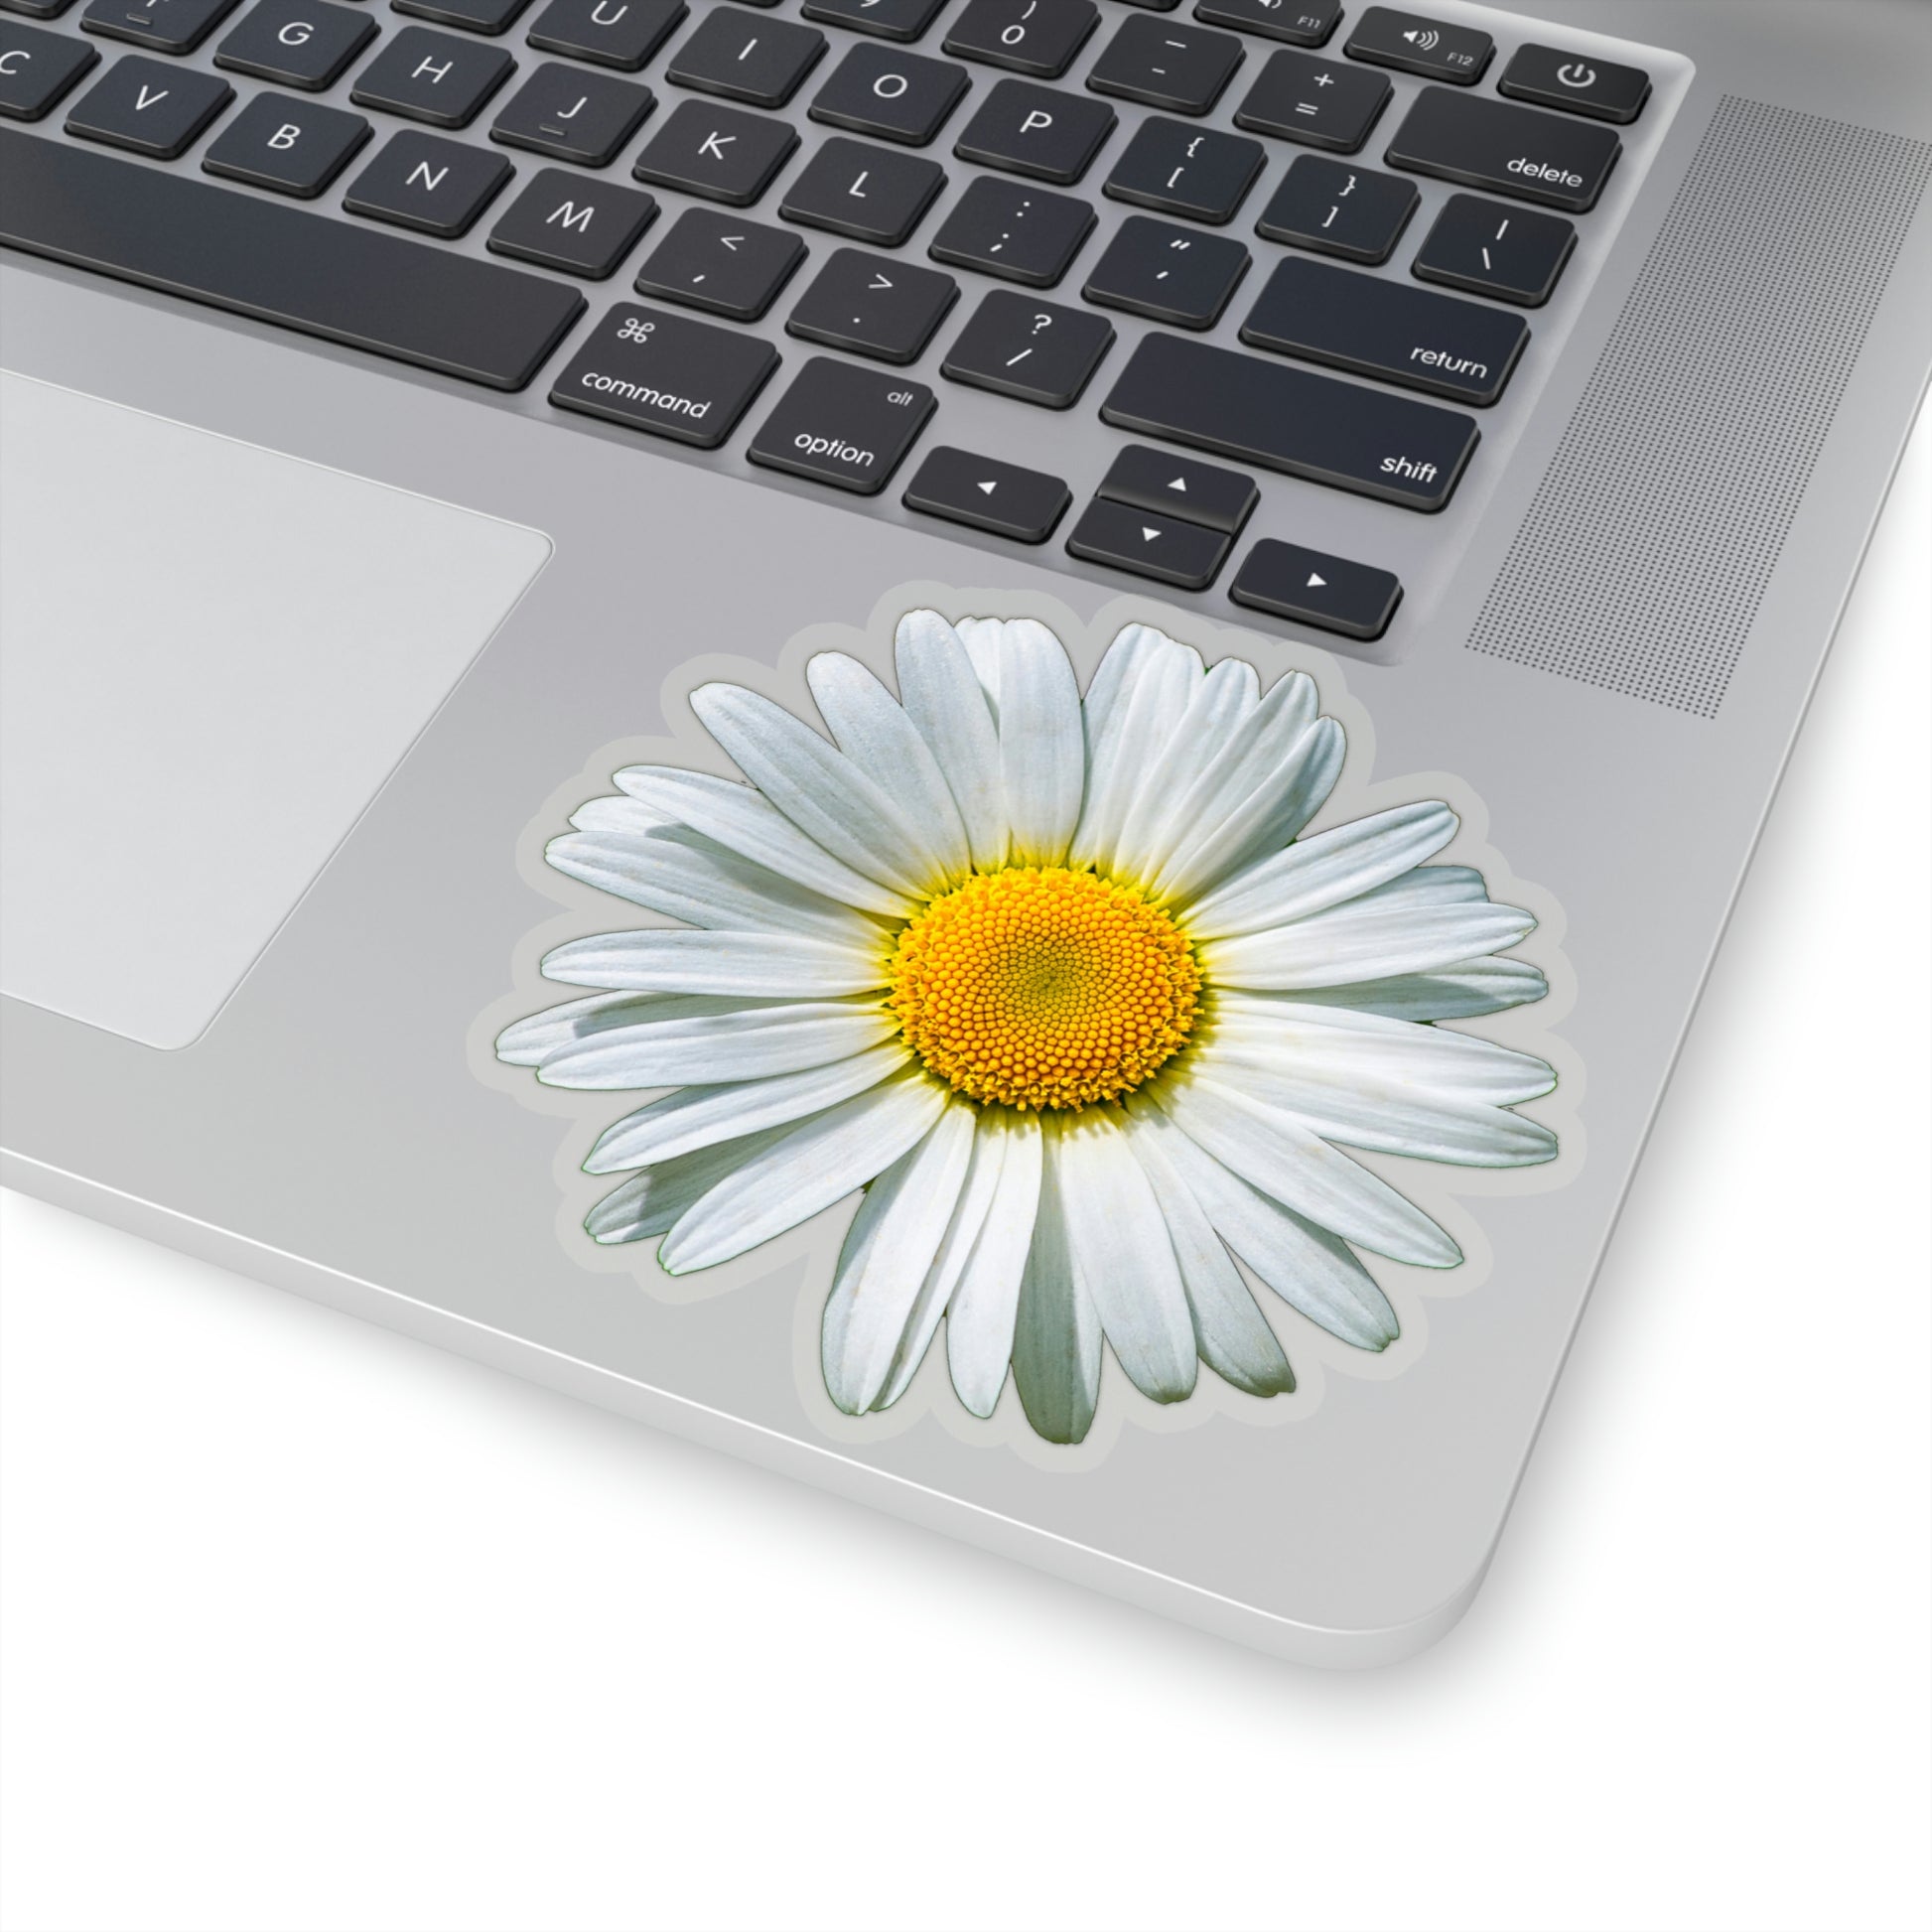 Daisy Sticker Decal, White Flower Car Laptop Decal Vinyl Cute Waterbottle Tumbler Bumper Aesthetic Window Wall Mural Starcove Fashion